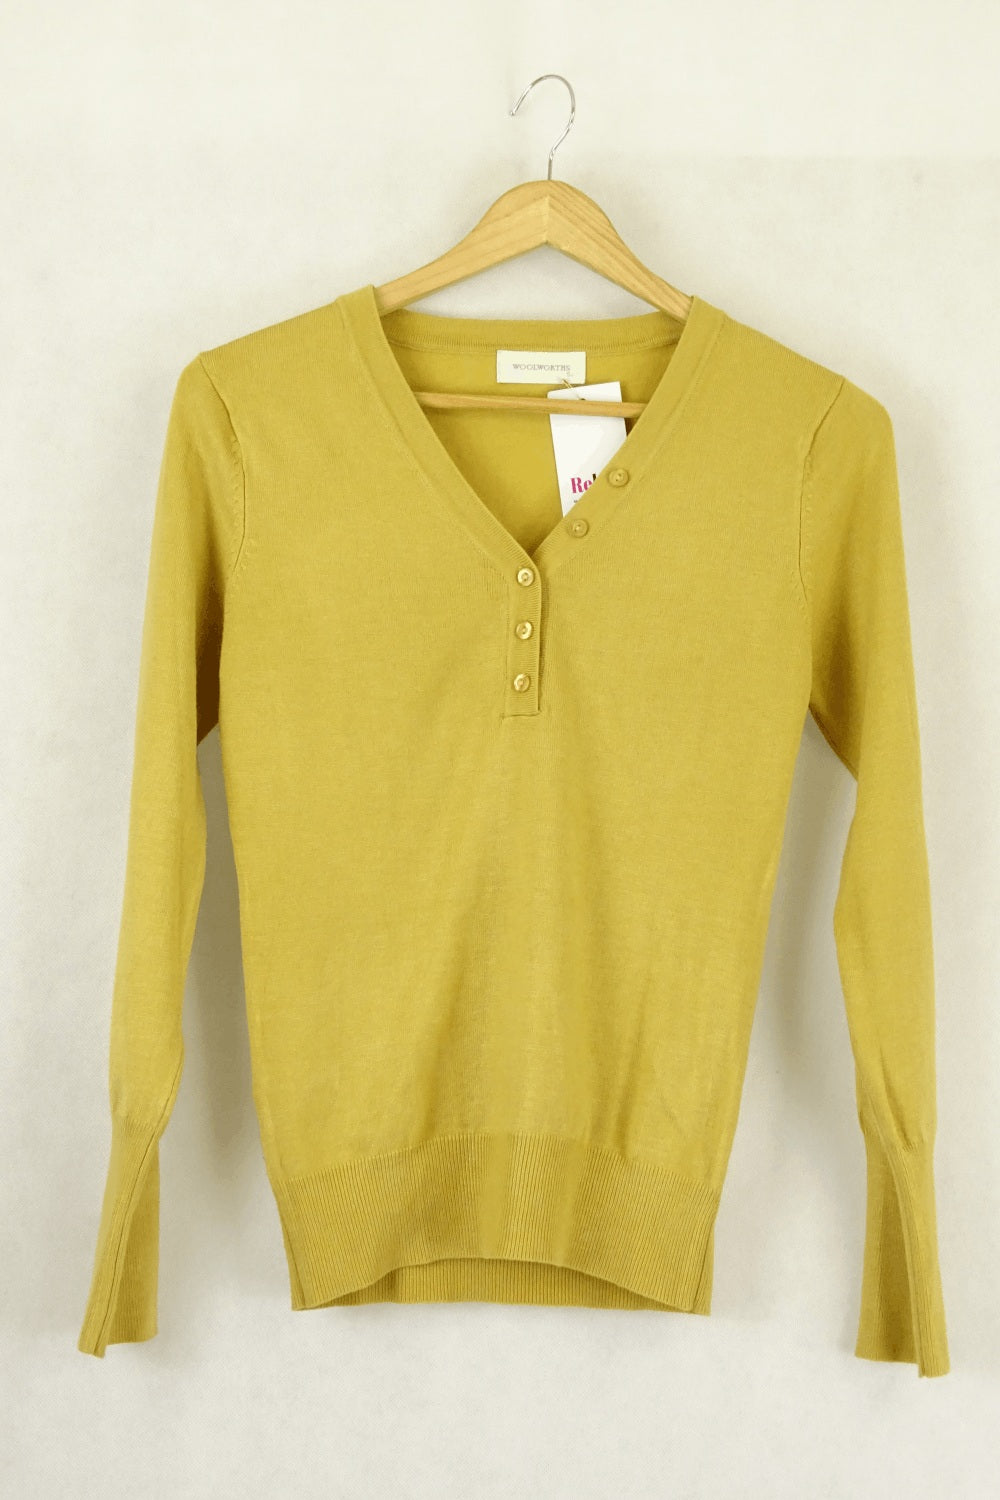 Woolworths Yellow Cardigan S